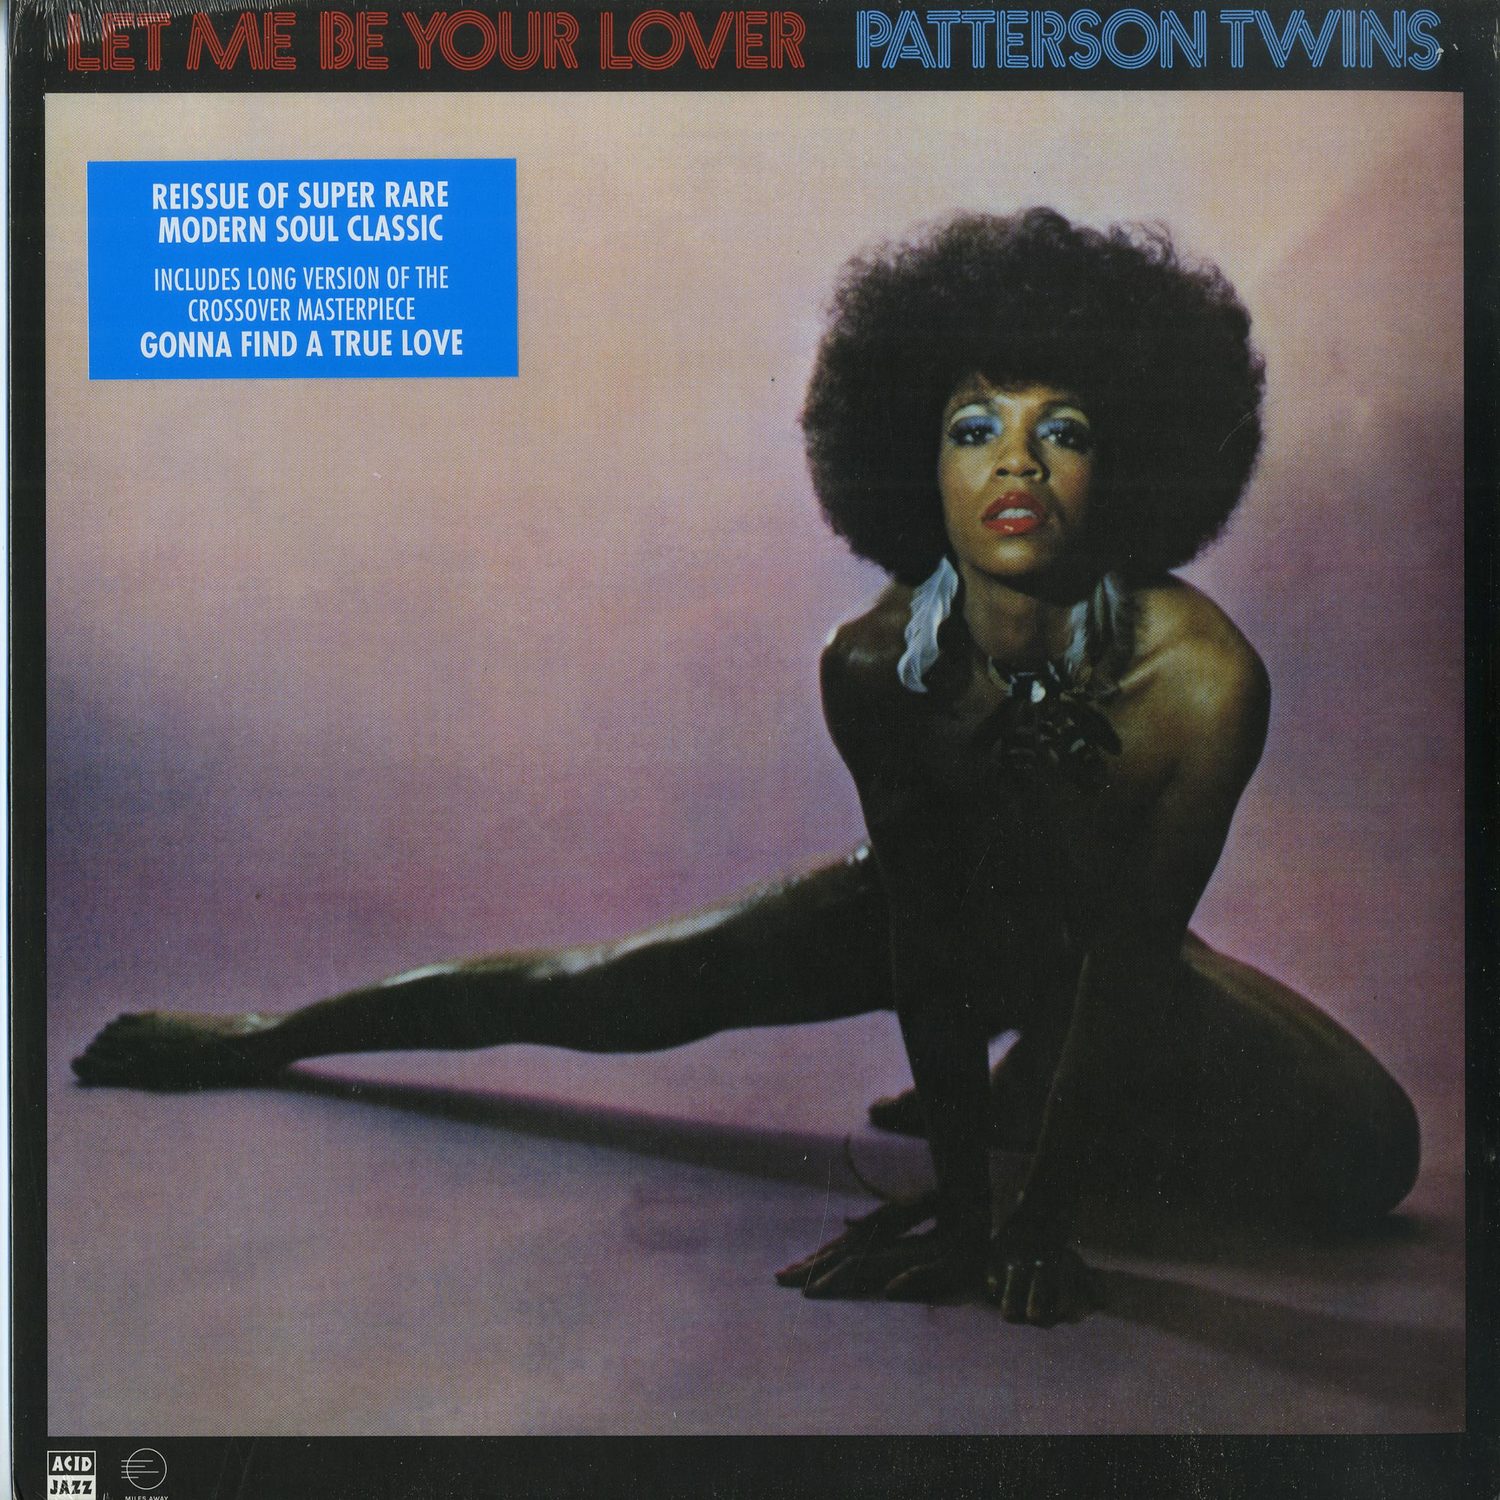 Patterson Twins - LET ME BE YOUR LOVER 